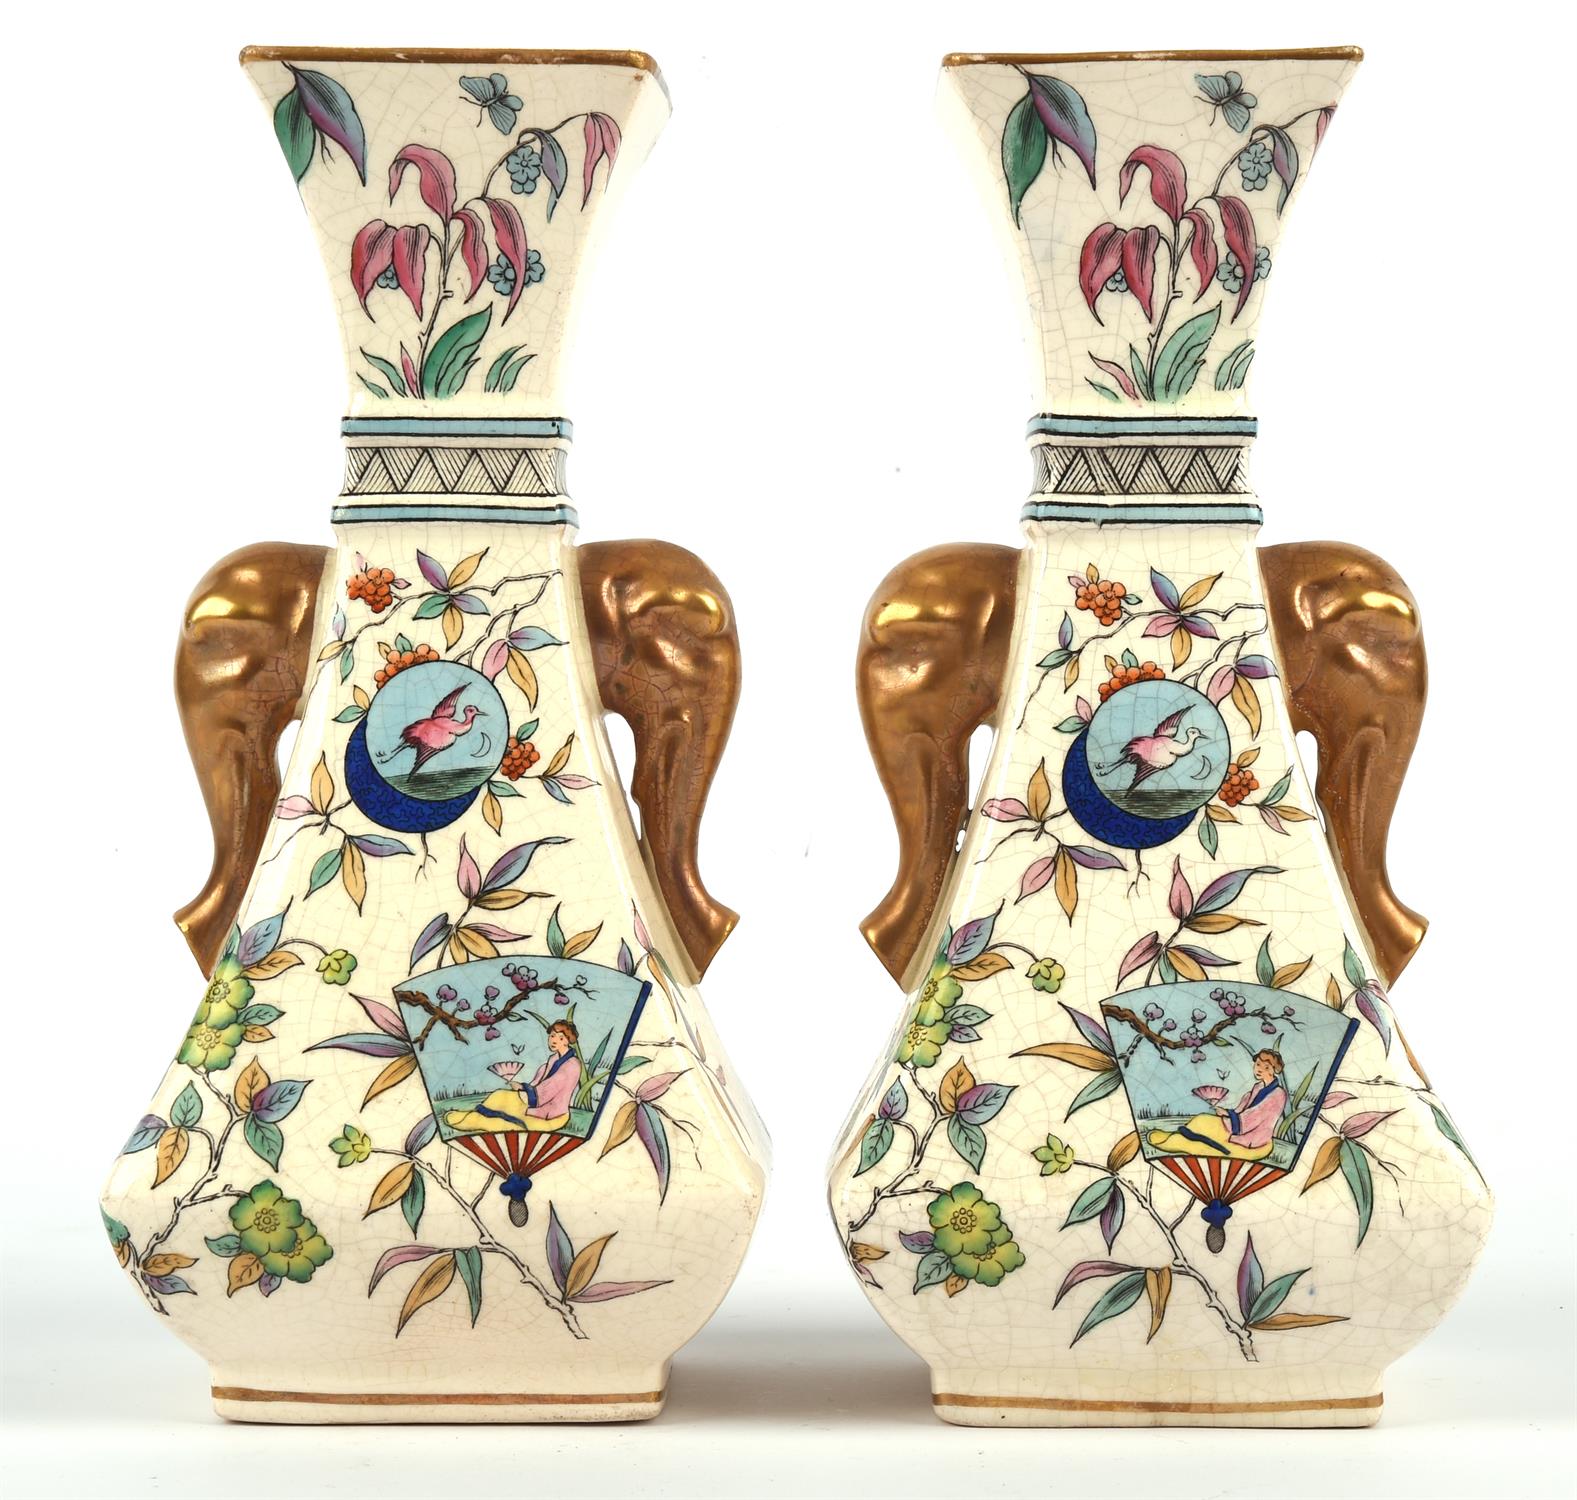 Christopher Dresser (British, 1834-1904), pair of printed and painted vases, with elephant head